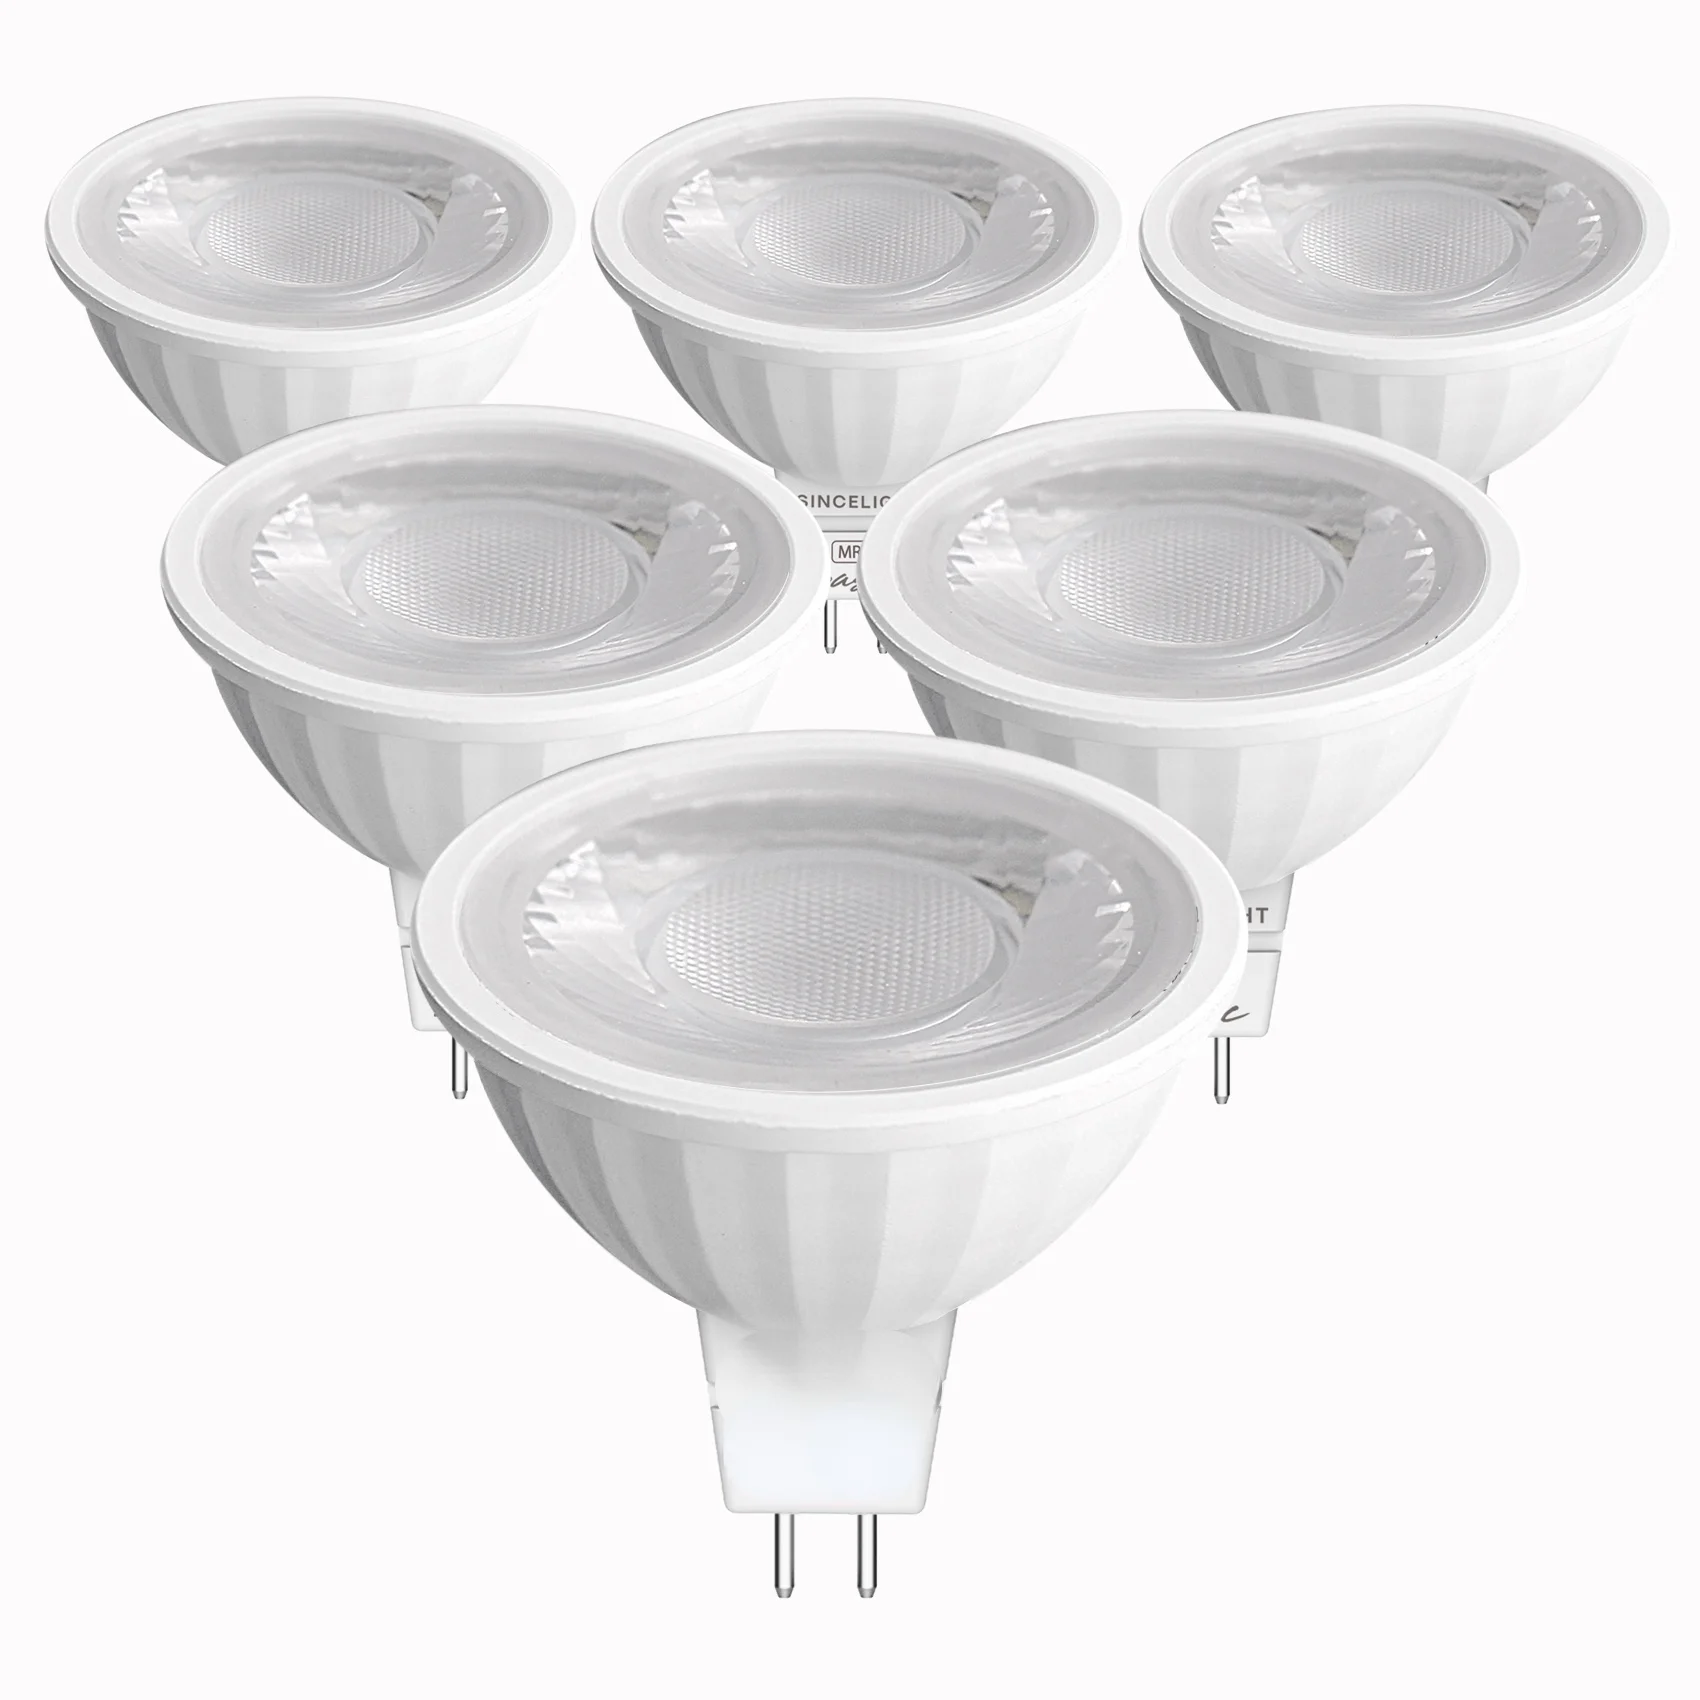 

PACK OF 6 MR16 LED Reflector light bulb with Gu5.3 base,6W,12V AC/DC(Non-Dimmable/Spotlight/Downlights)